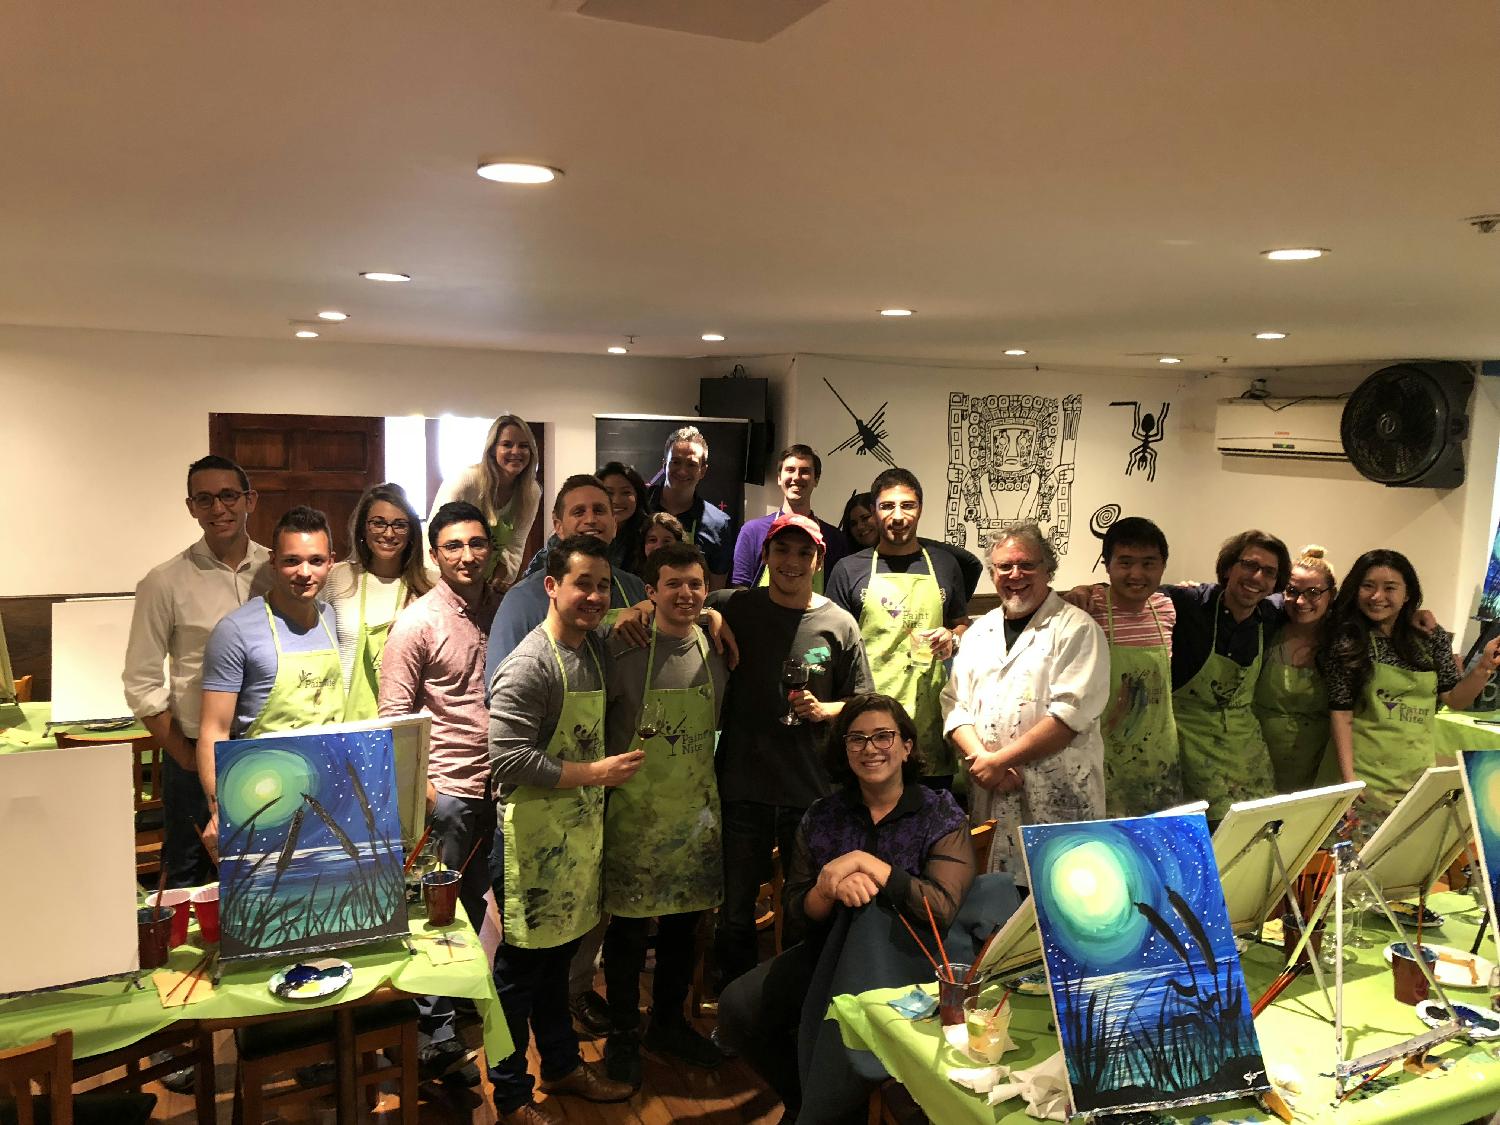 Monthly Offsites - Wine and paint!